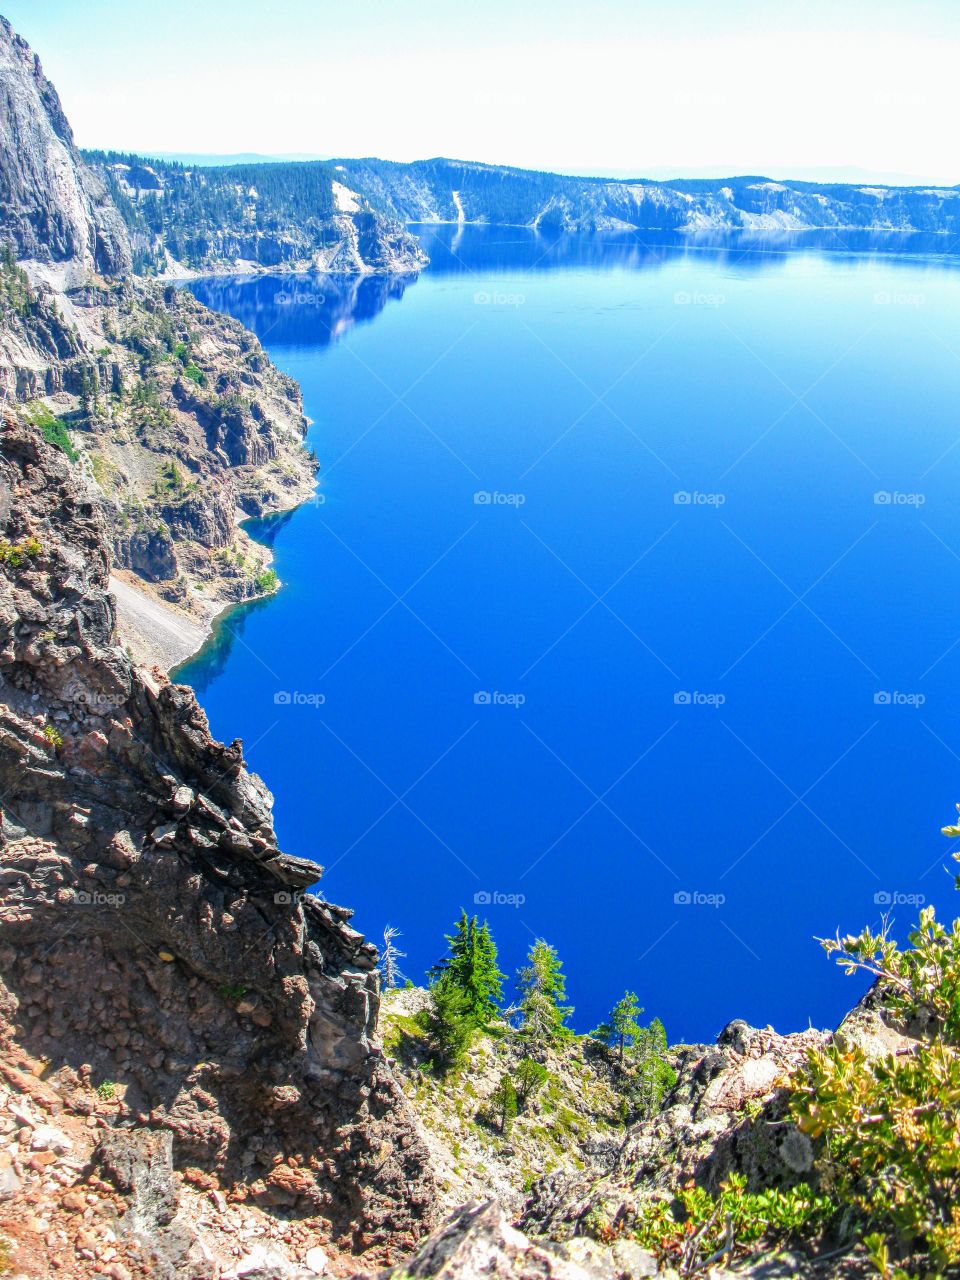 Amazing Bright Blue Waters of Crater Lake, OR "Blue Lagoon"